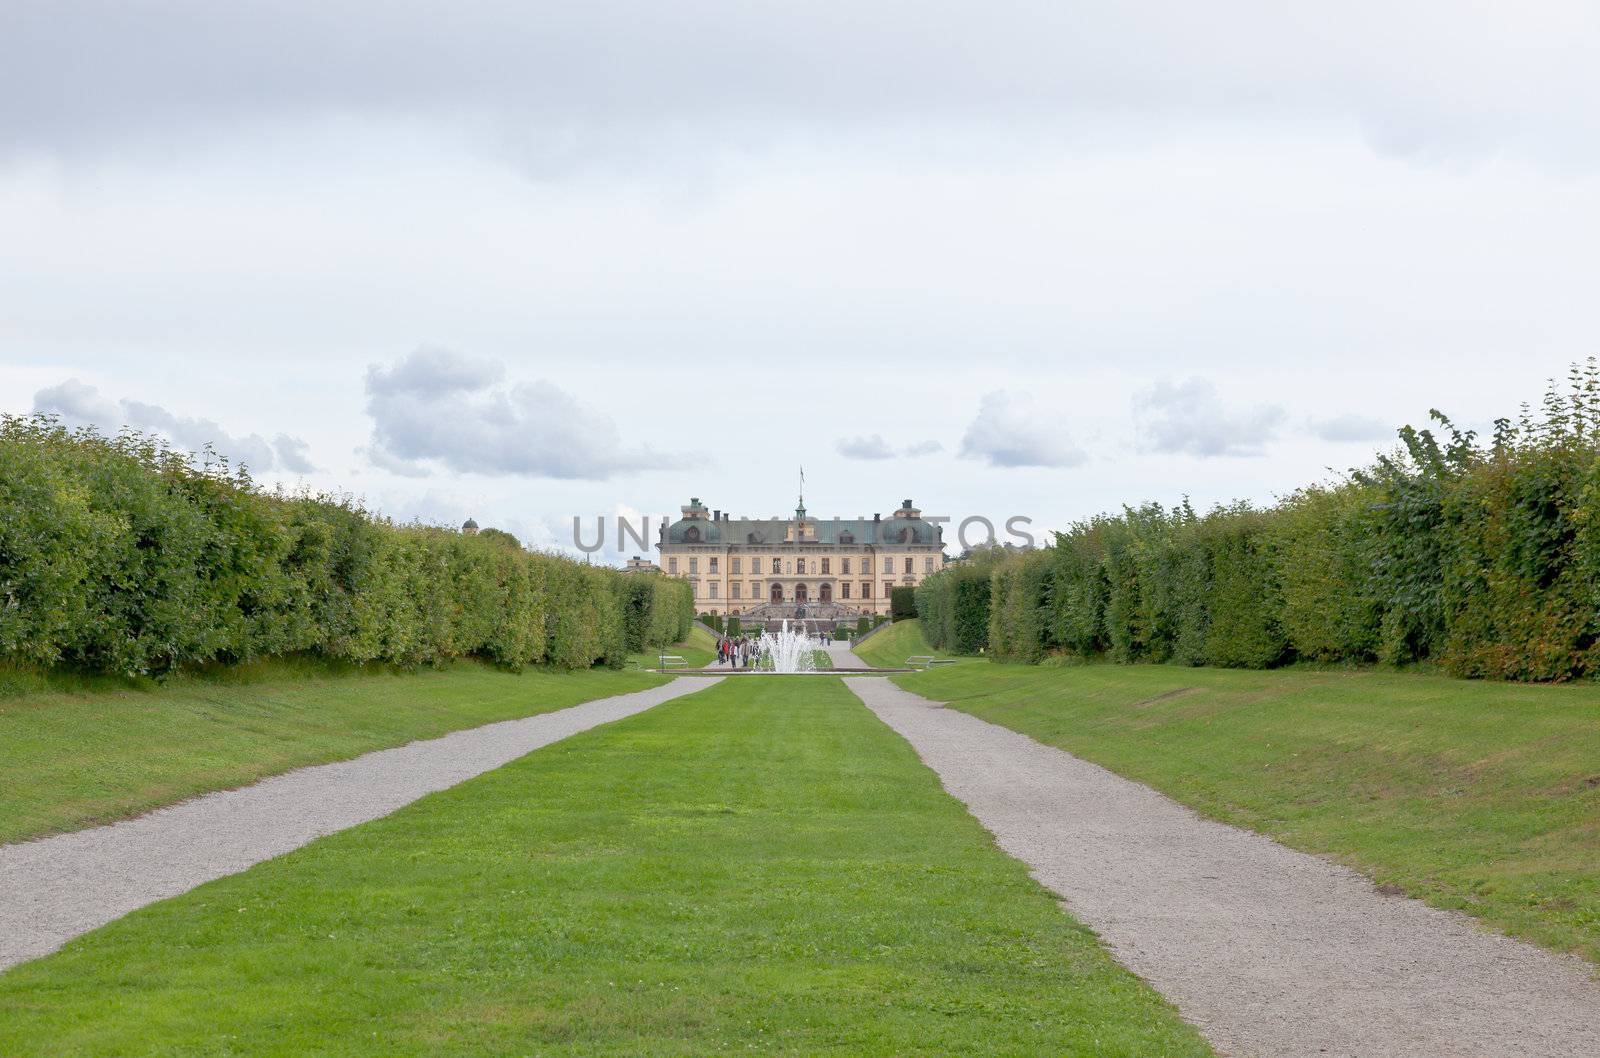 The royal garden of Drottningholms Palace by gary718